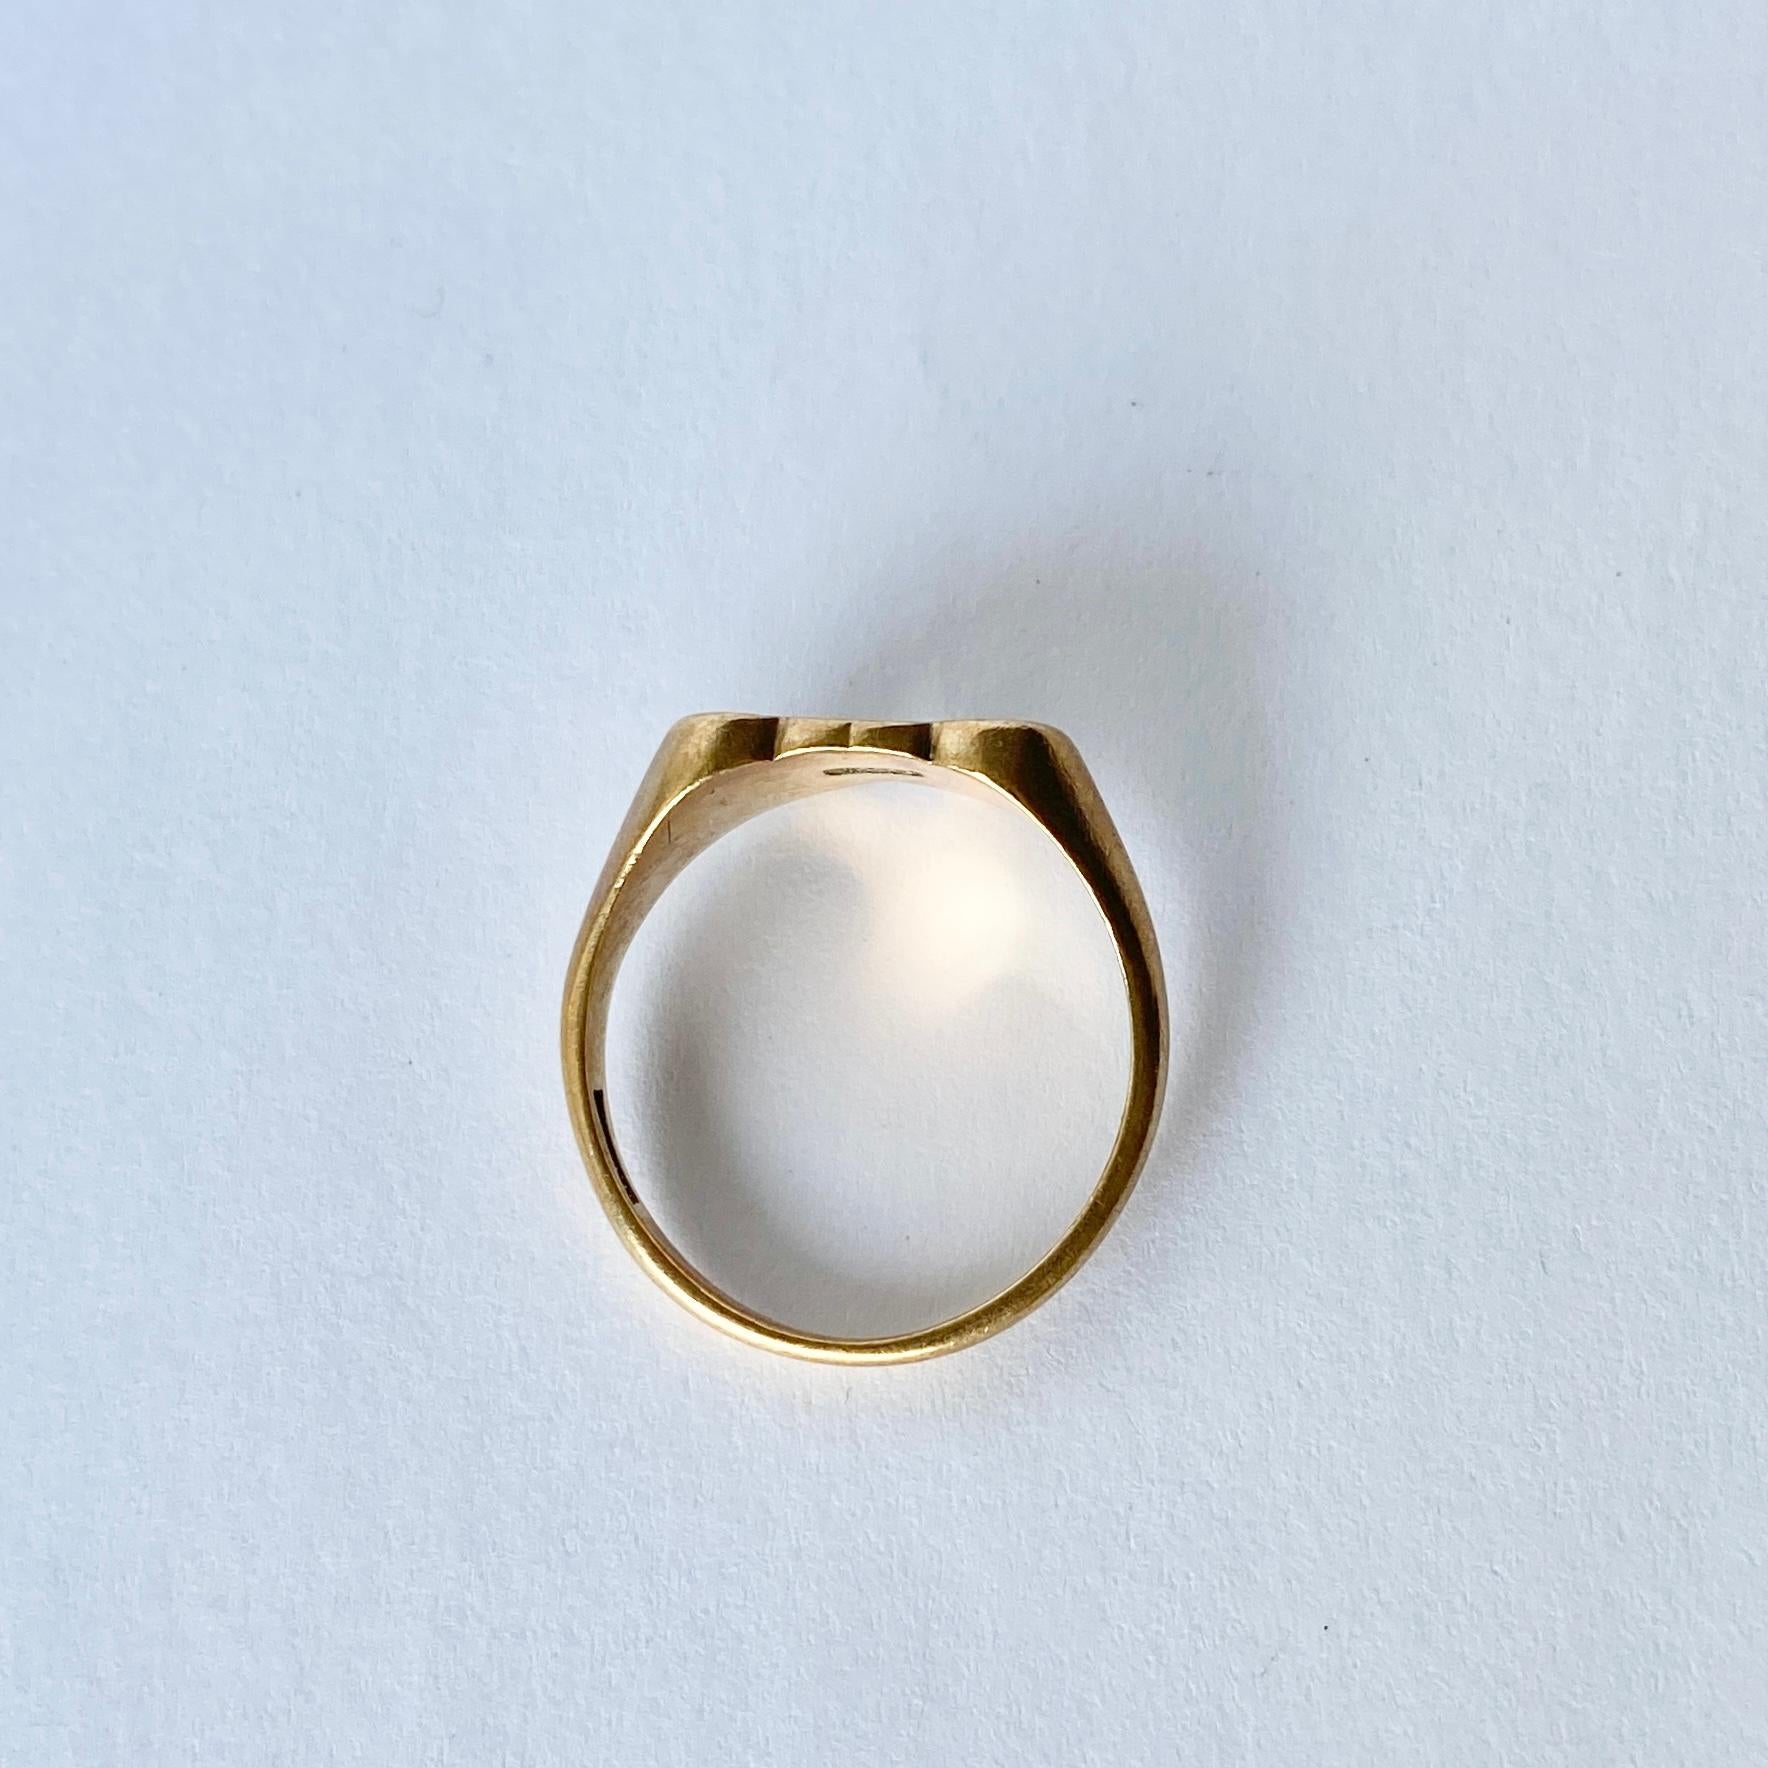 This gorgeous double heart signet ring is modelled in 9carat gold. One heart is plain and glossy and the other is engraved. Hallmarked Birmingham, 1972.

Ring Size: P or 7 3/4 
Face Dimensions: 13x9mm

Weight: 3.8g